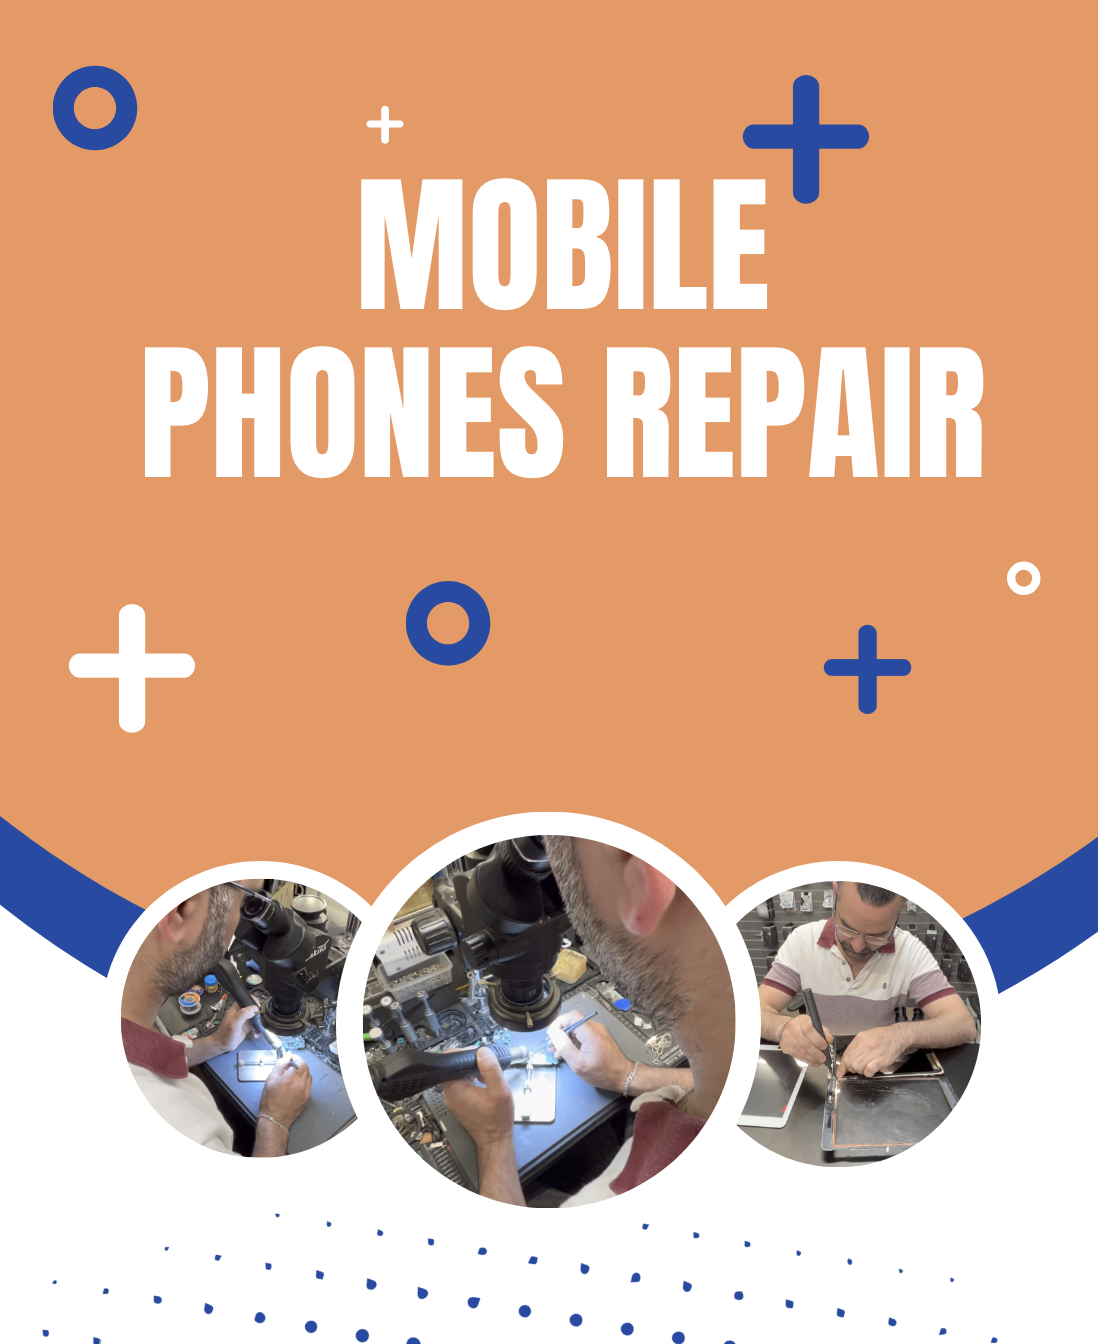 king phones, Mobile phones shop in Newark-on-Trent, Broken for months, fixed in Minutes, Buy and sell mobile phone, repair hardware and software screen and water damage repair laptop, xbox, PS4, PS5 & accessories